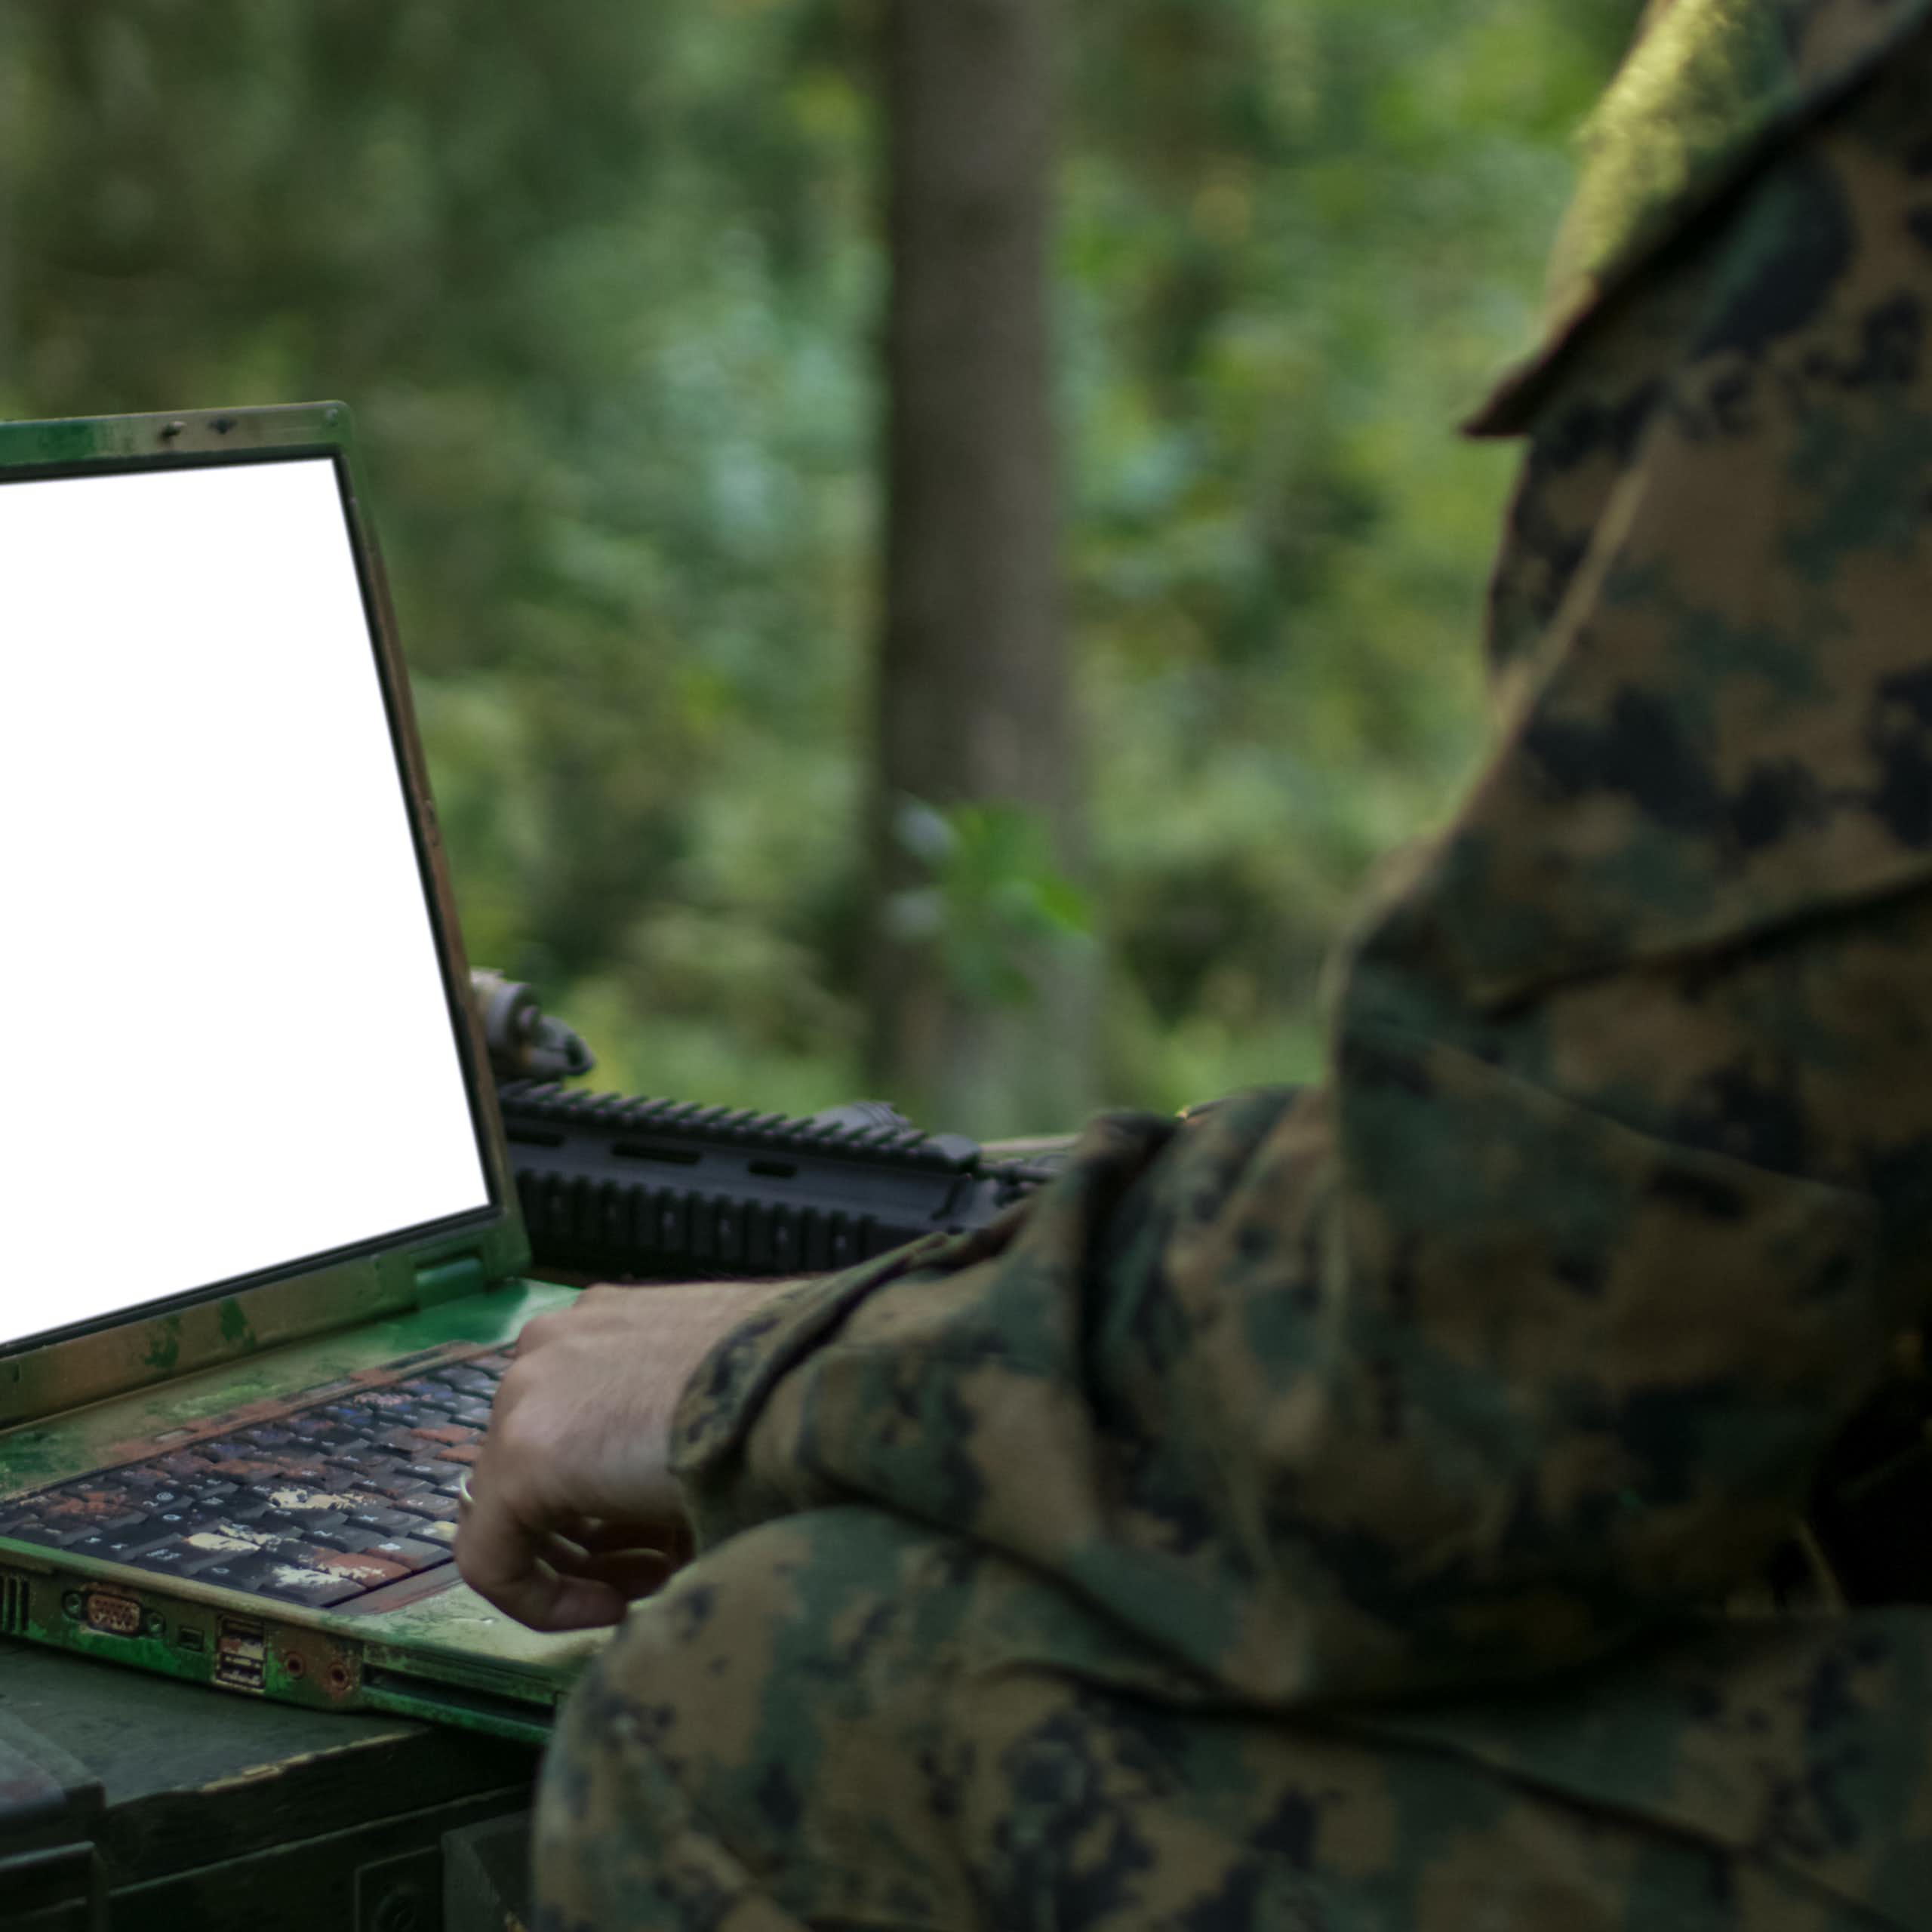 A person in camouflage clothing looks at a blank laptop screen.